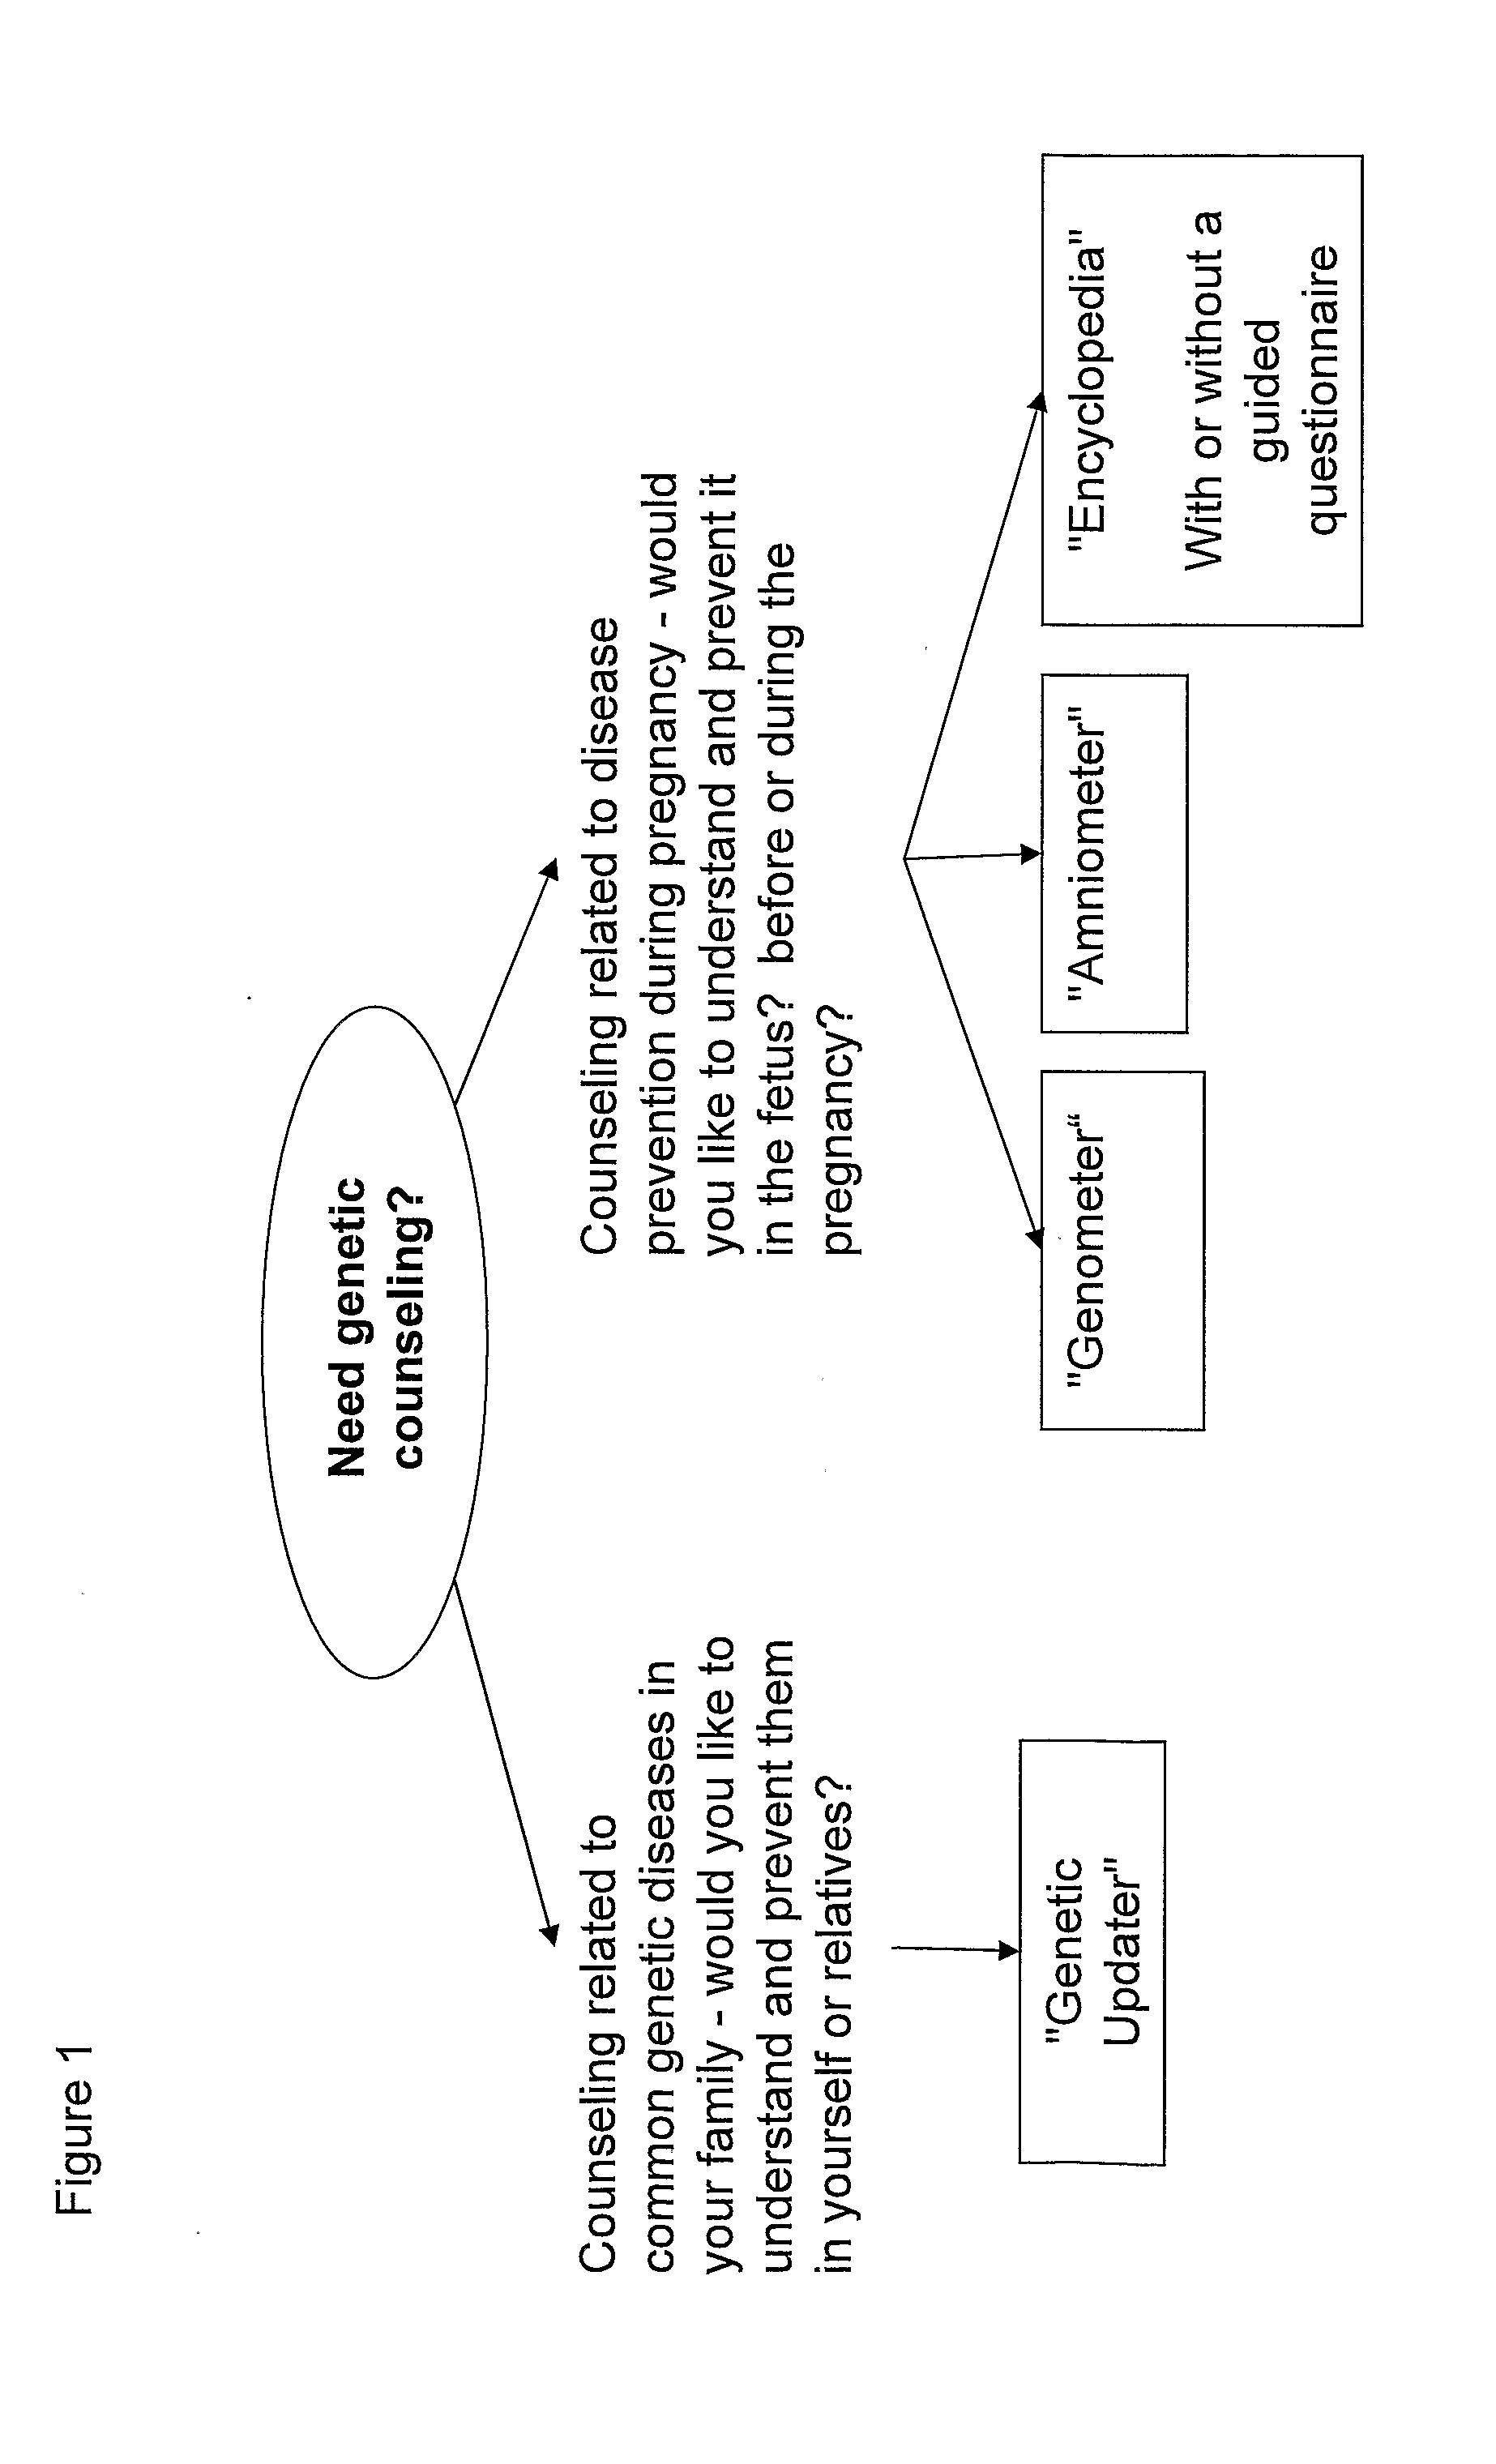 System, Method and Device for Comprehensive Individualized Genetic Information or Genetic Counseling